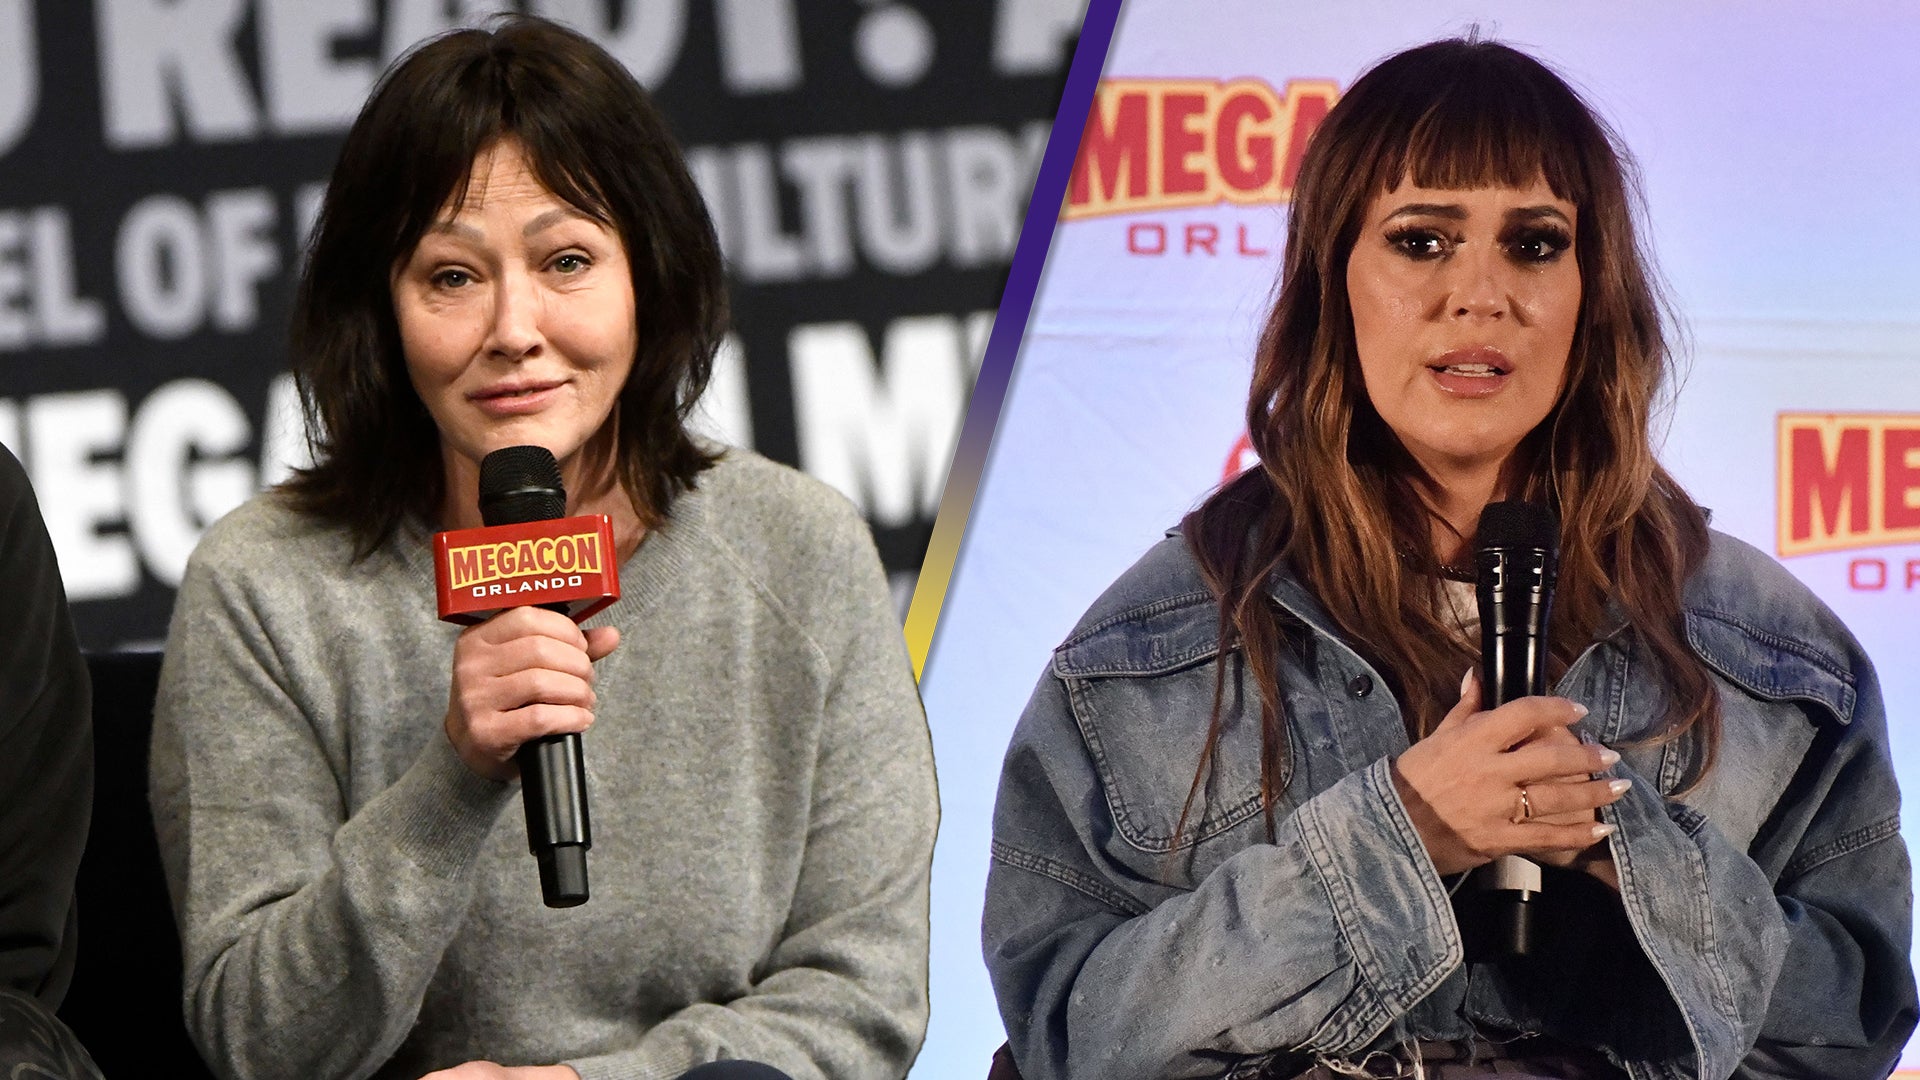 Shannen Doherty Fires Back at Alyssa Milano With Support From 'Charmed' Co-Stars